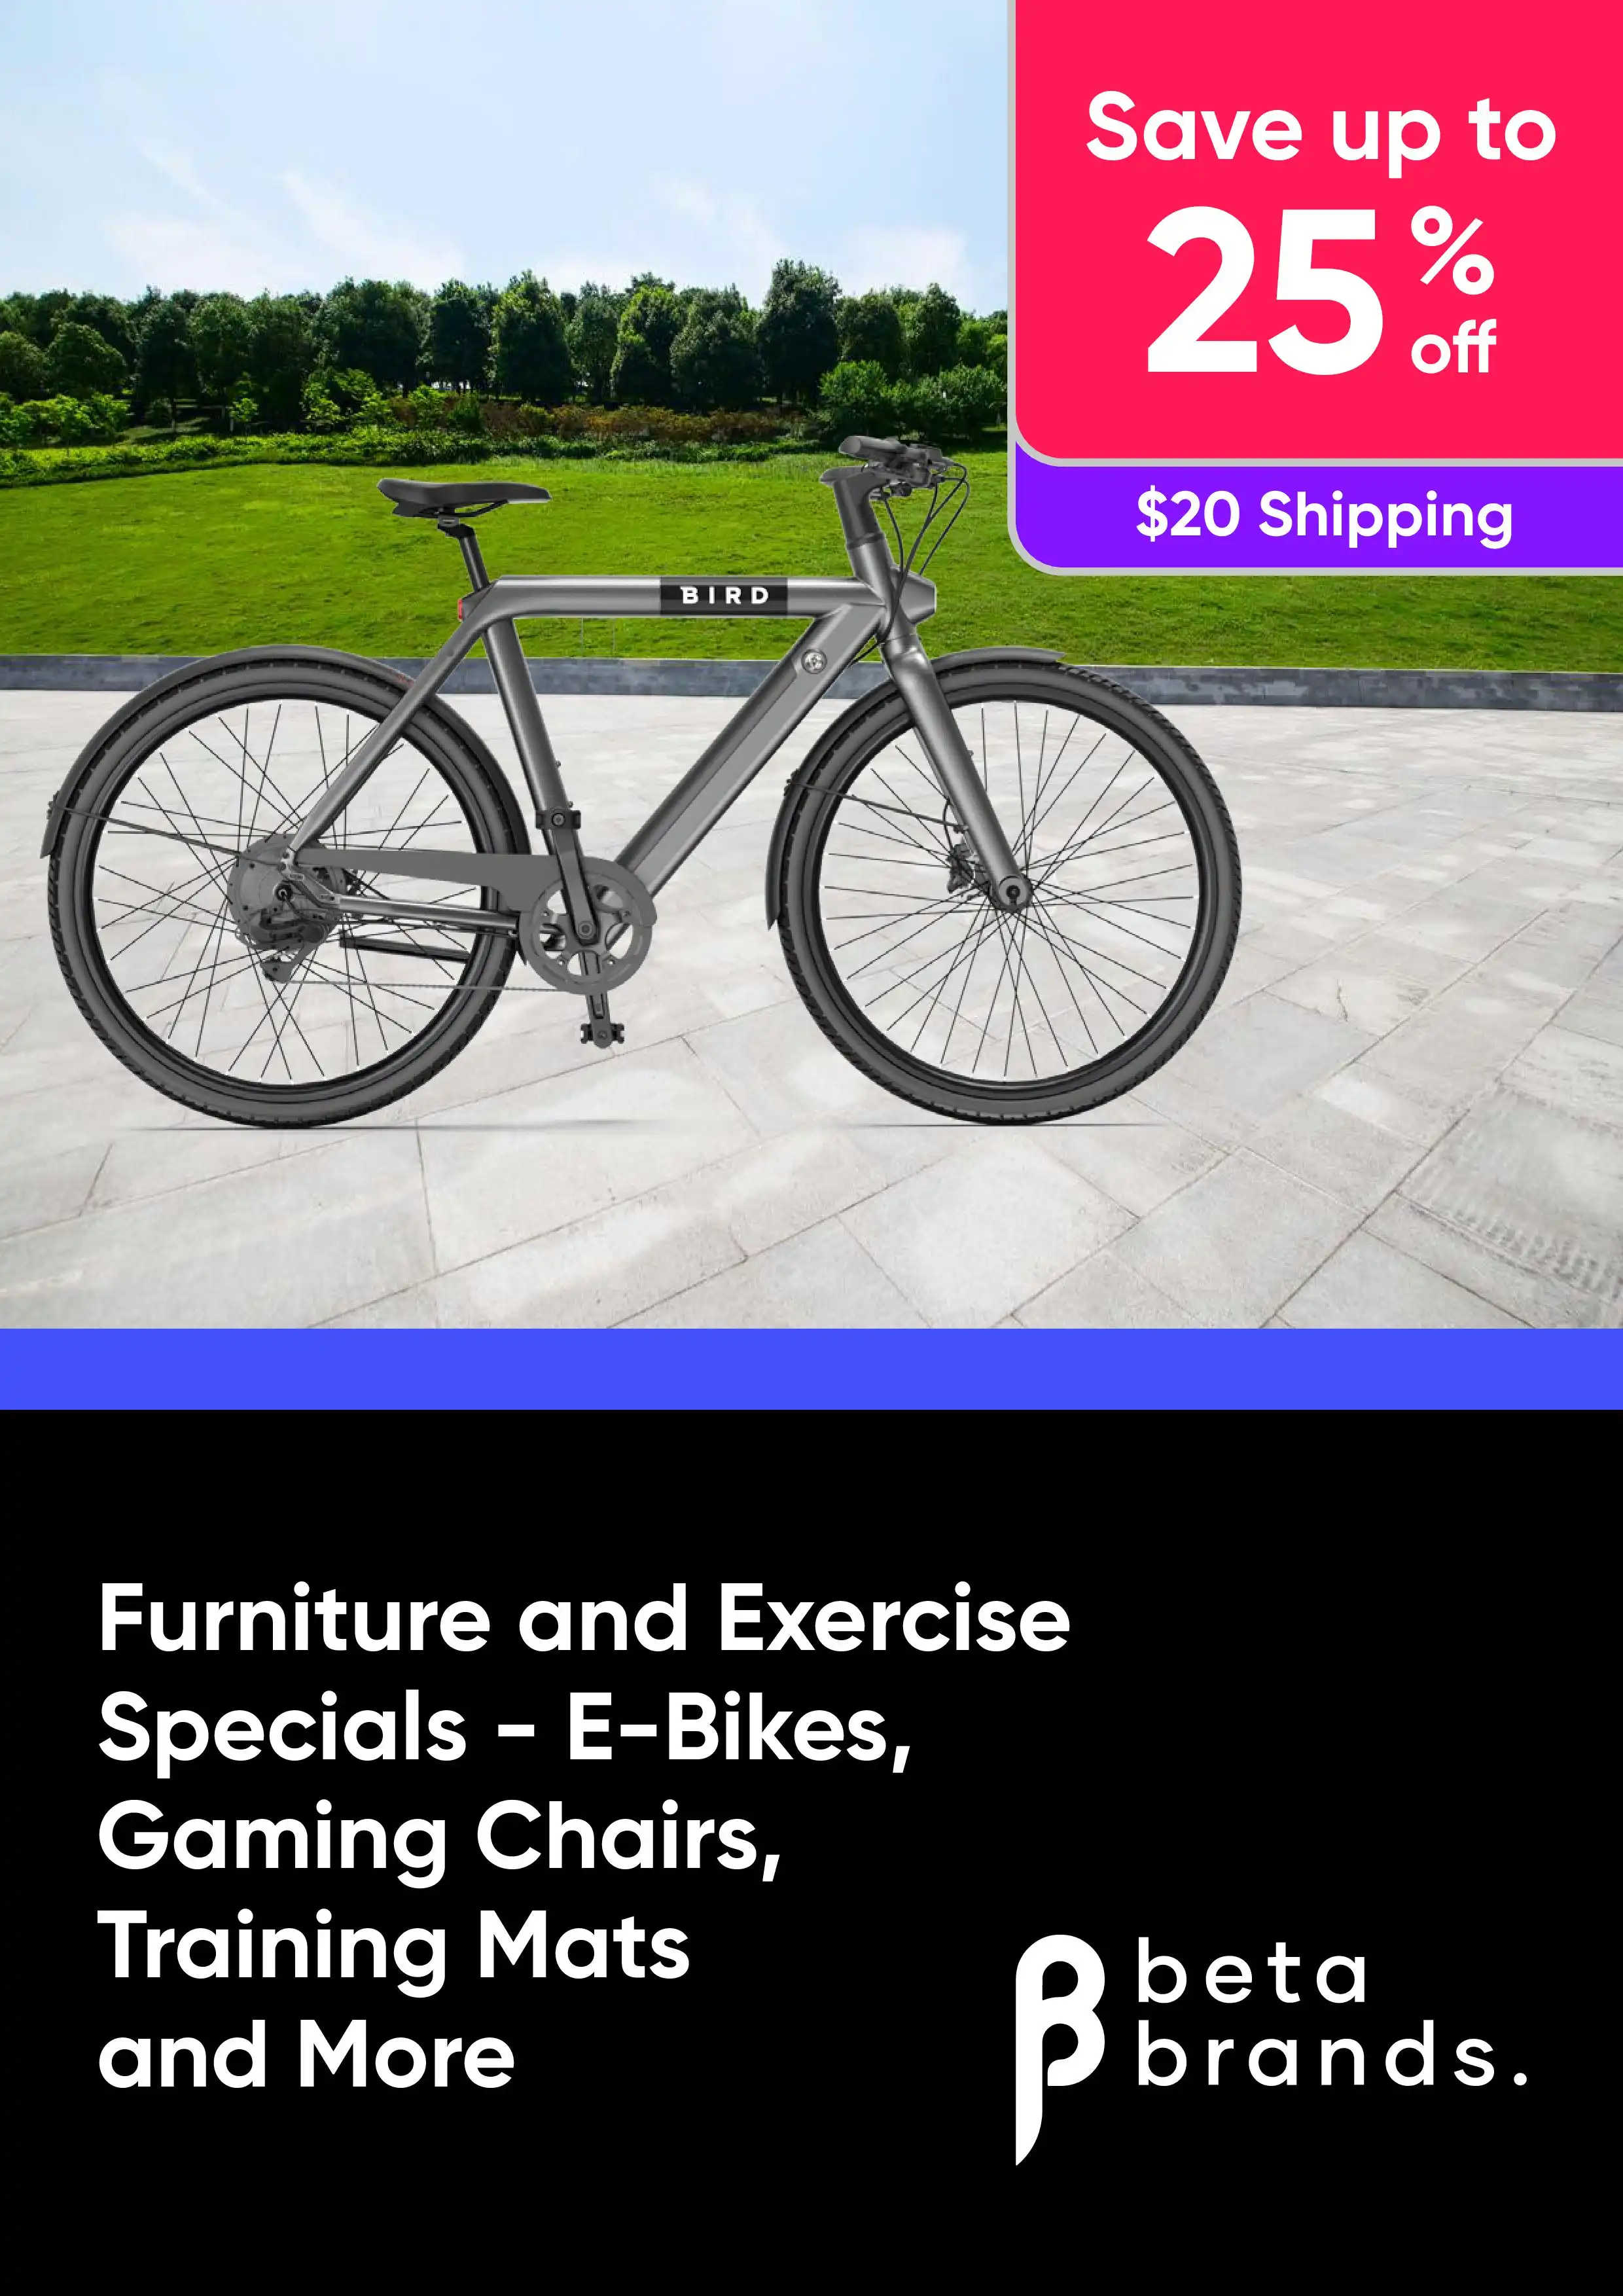 Furniture and Exercise Specials - Save On E-Bikes, Gaming Chairs, Training Mats and More